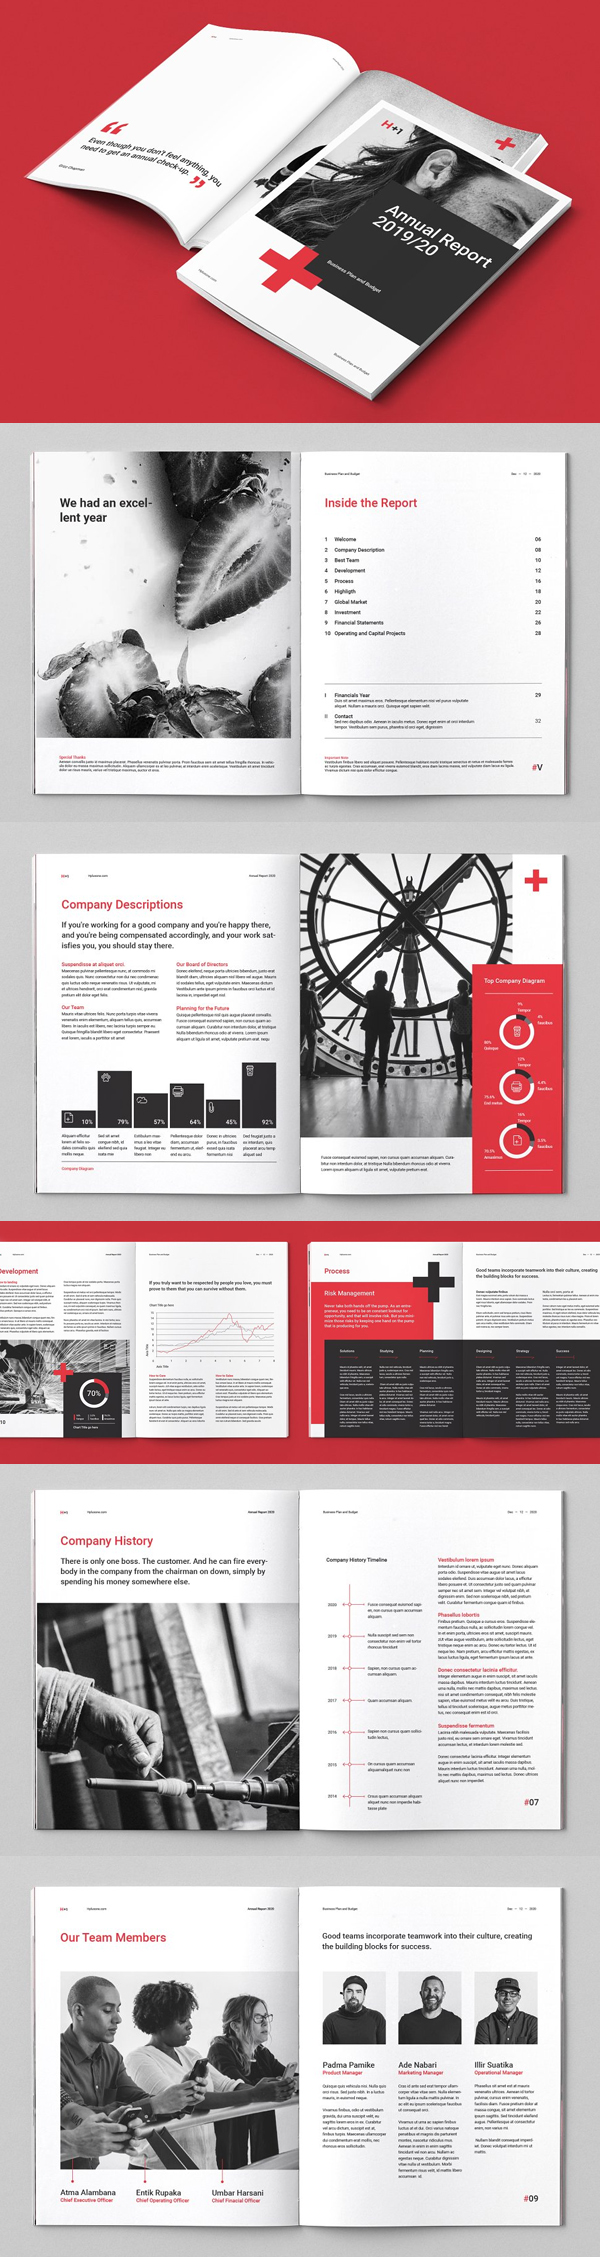 Clean Annual Report Template